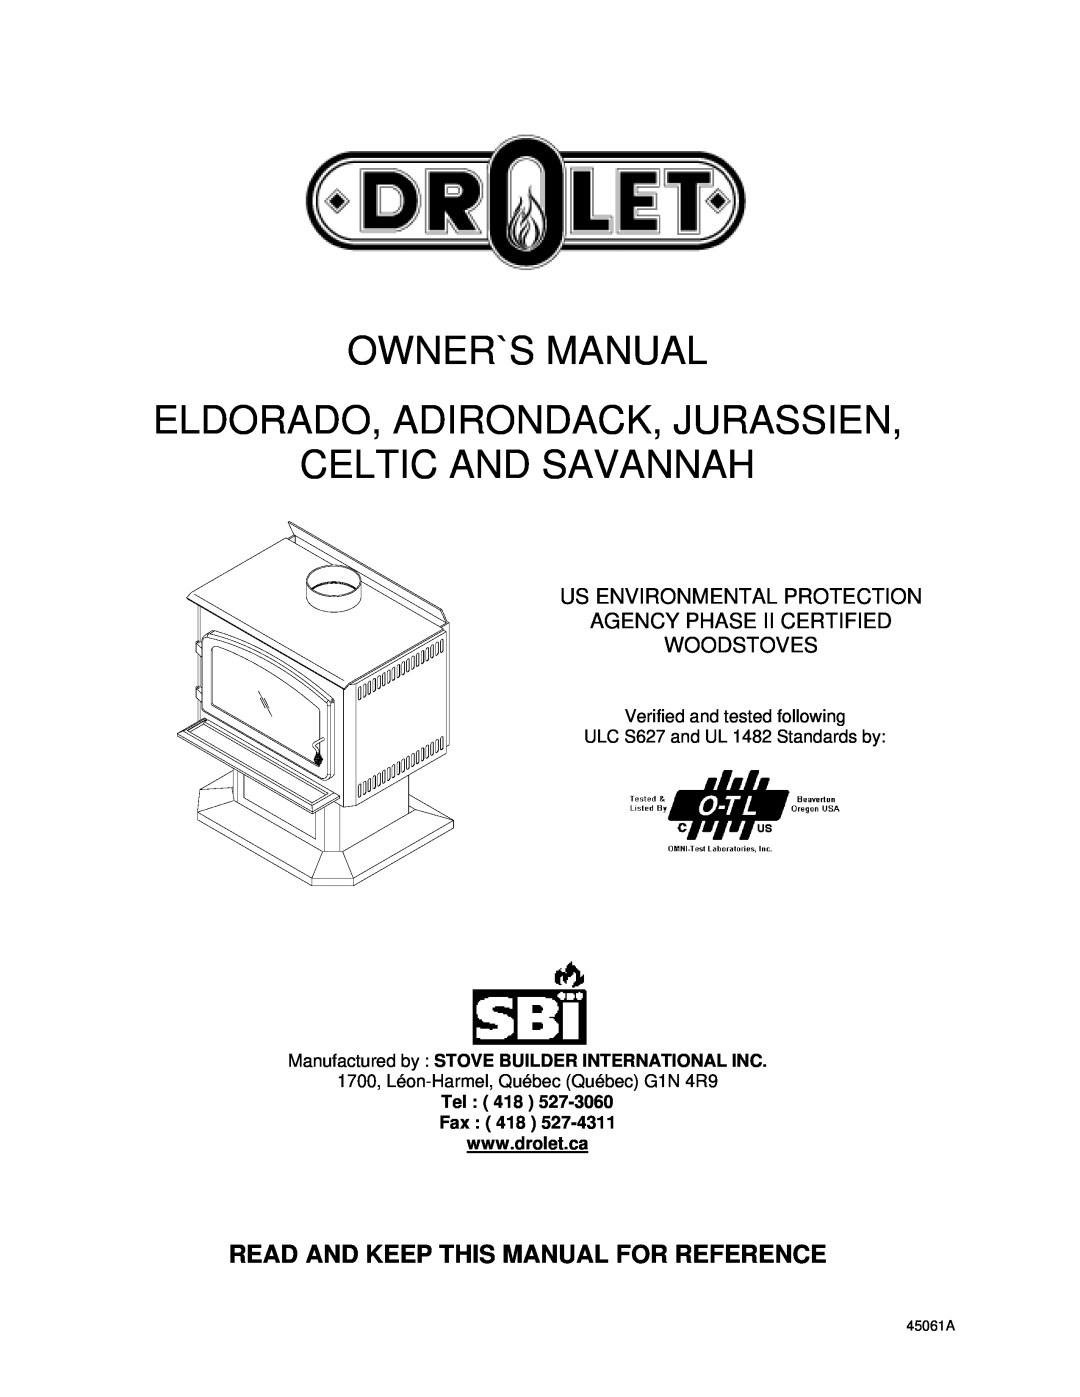 Drolet WOODSTOVES owner manual Read And Keep This Manual For Reference, Manufactured by STOVE BUILDER INTERNATIONAL INC 